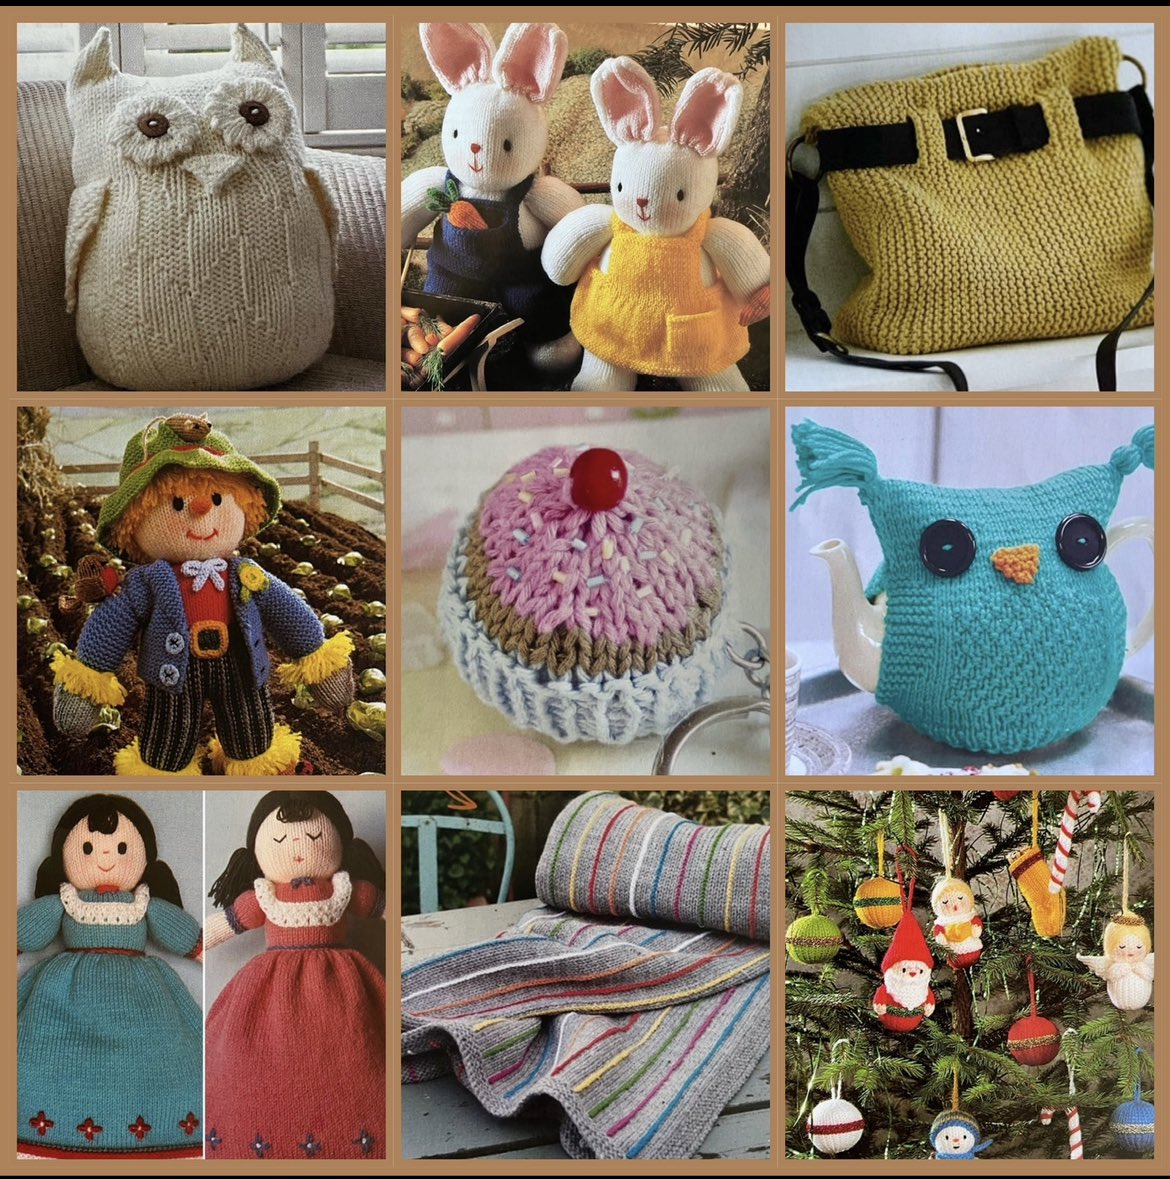 Here are some knitted gift ideas for you to make for friends and loved ones 🧶🧵🪡 #ElevensesHour #MHHSBD #craftbizparty #knit #handmadegifts #shopindie #vintage #crafts #ChristmasInJuly #yarn etsy.com/shop/DWCrochet…